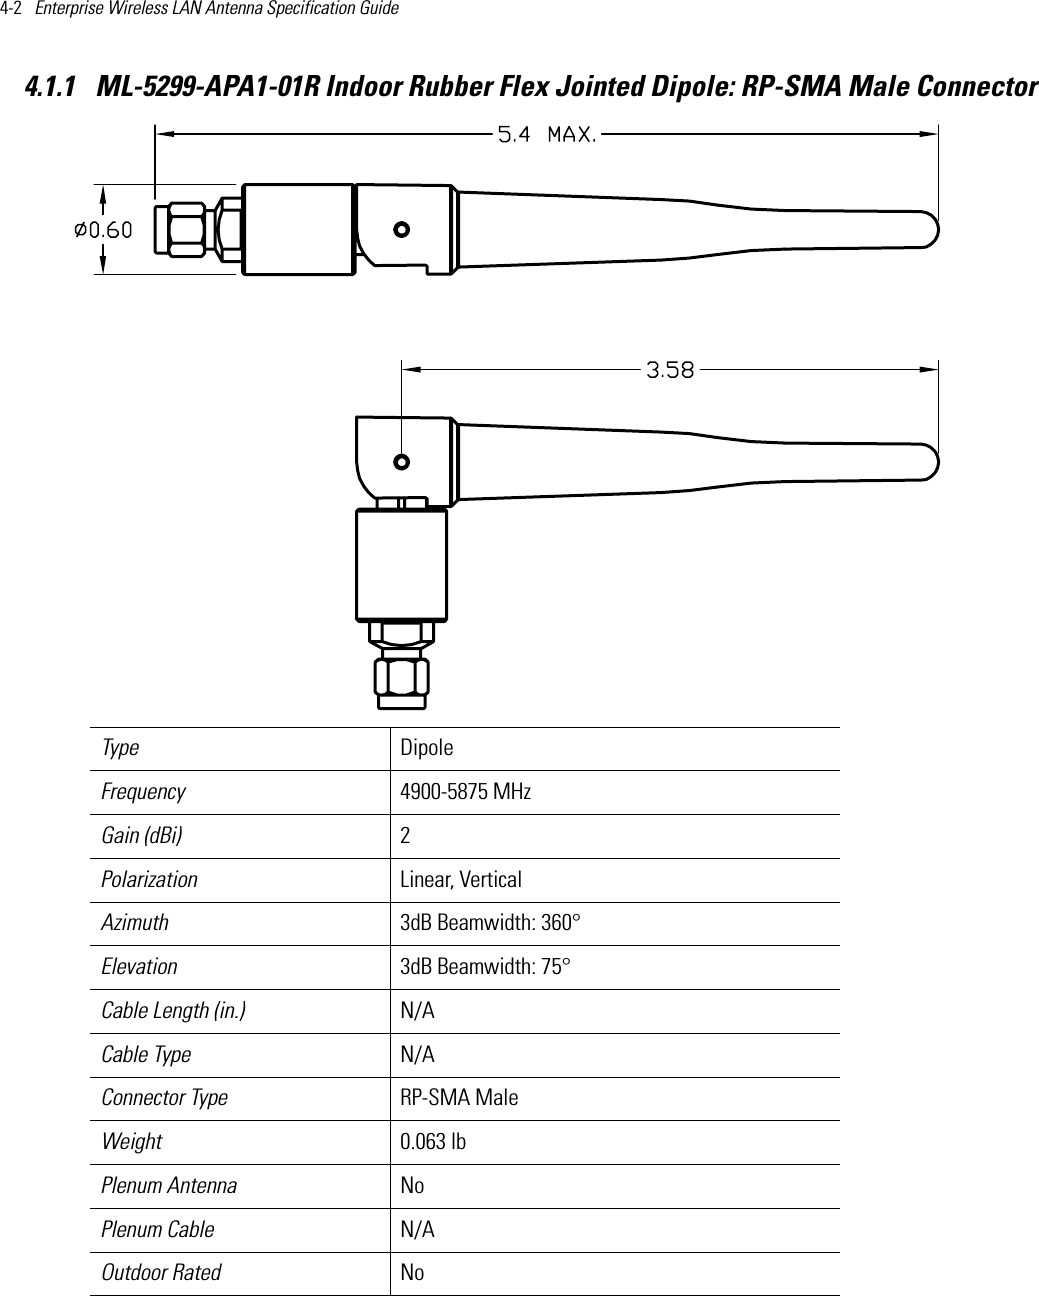 4-2   Enterprise Wireless LAN Antenna Specification Guide 4.1.1  ML-5299-APA1-01R Indoor Rubber Flex Jointed Dipole: RP-SMA Male Connector  Type Dipole Frequency 4900-5875 MHzGain (dBi) 2Polarization Linear, VerticalAzimuth 3dB Beamwidth: 360°Elevation 3dB Beamwidth: 75°Cable Length (in.) N/ACable Type N/AConnector Type RP-SMA Male Weight 0.063 lbPlenum Antenna NoPlenum Cable N/AOutdoor Rated No